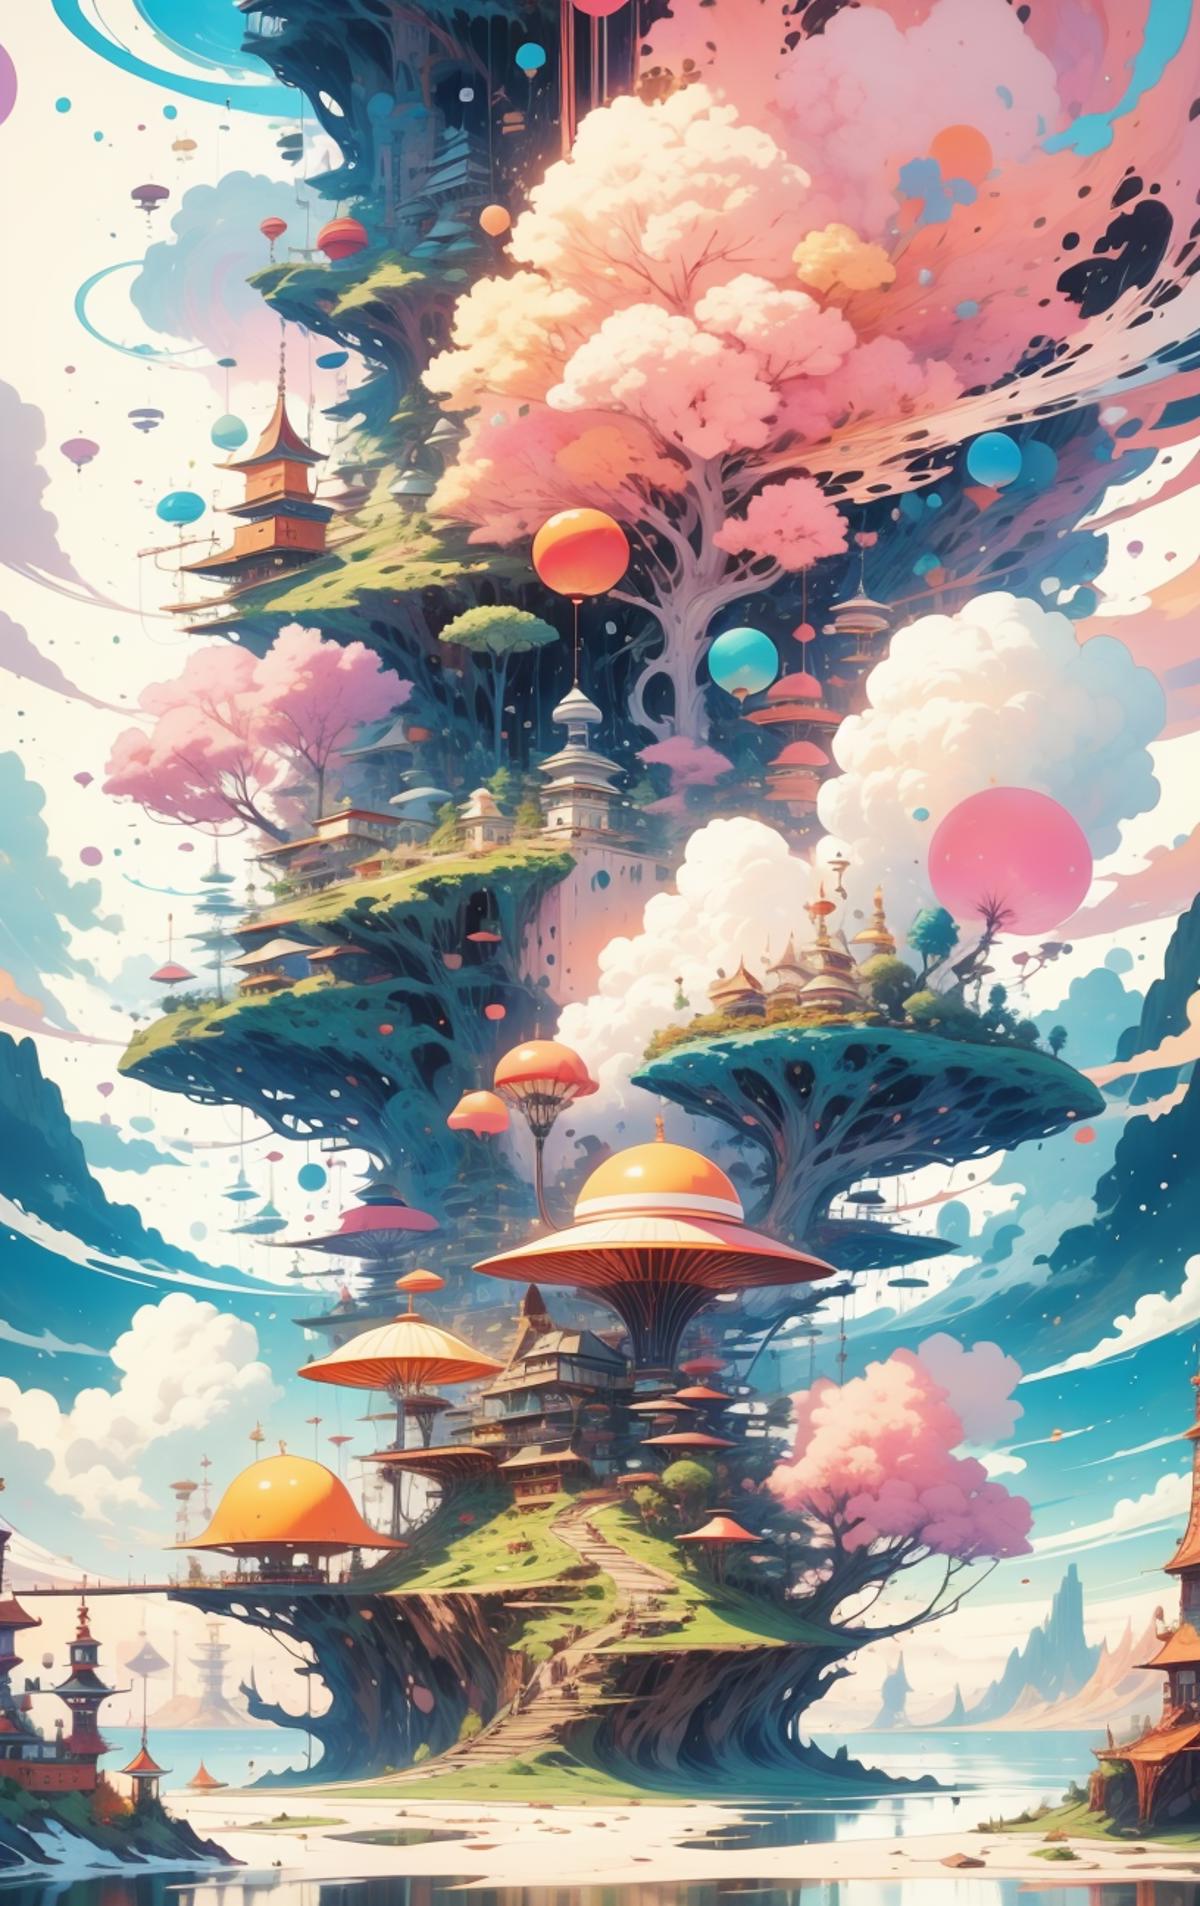 A beautifully detailed colorful painting of a fantasy land with a castle, mushrooms, and floating islands.